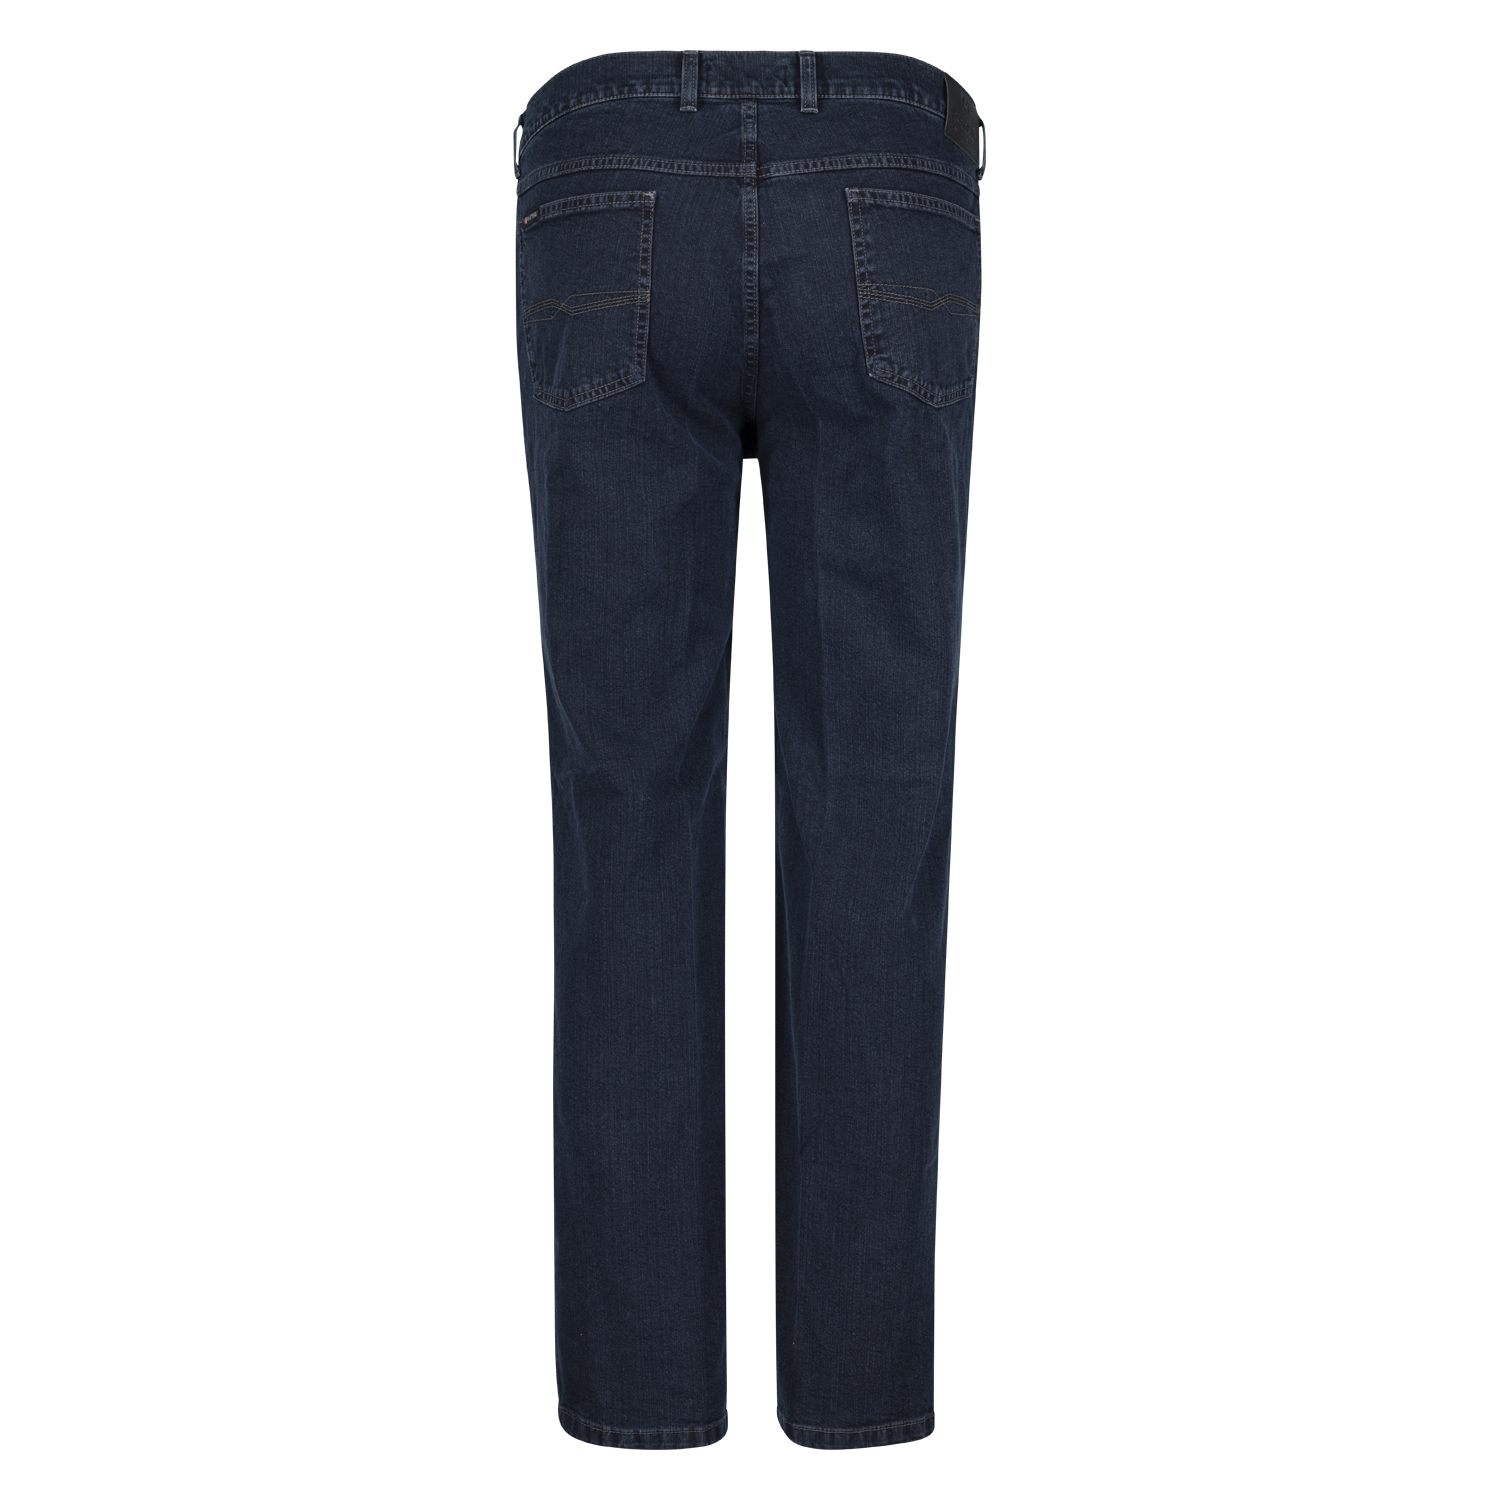 Five pocket jeans model "Peter" by Pioneer in oversize dark blue stonewash (high rise): 59 - 85